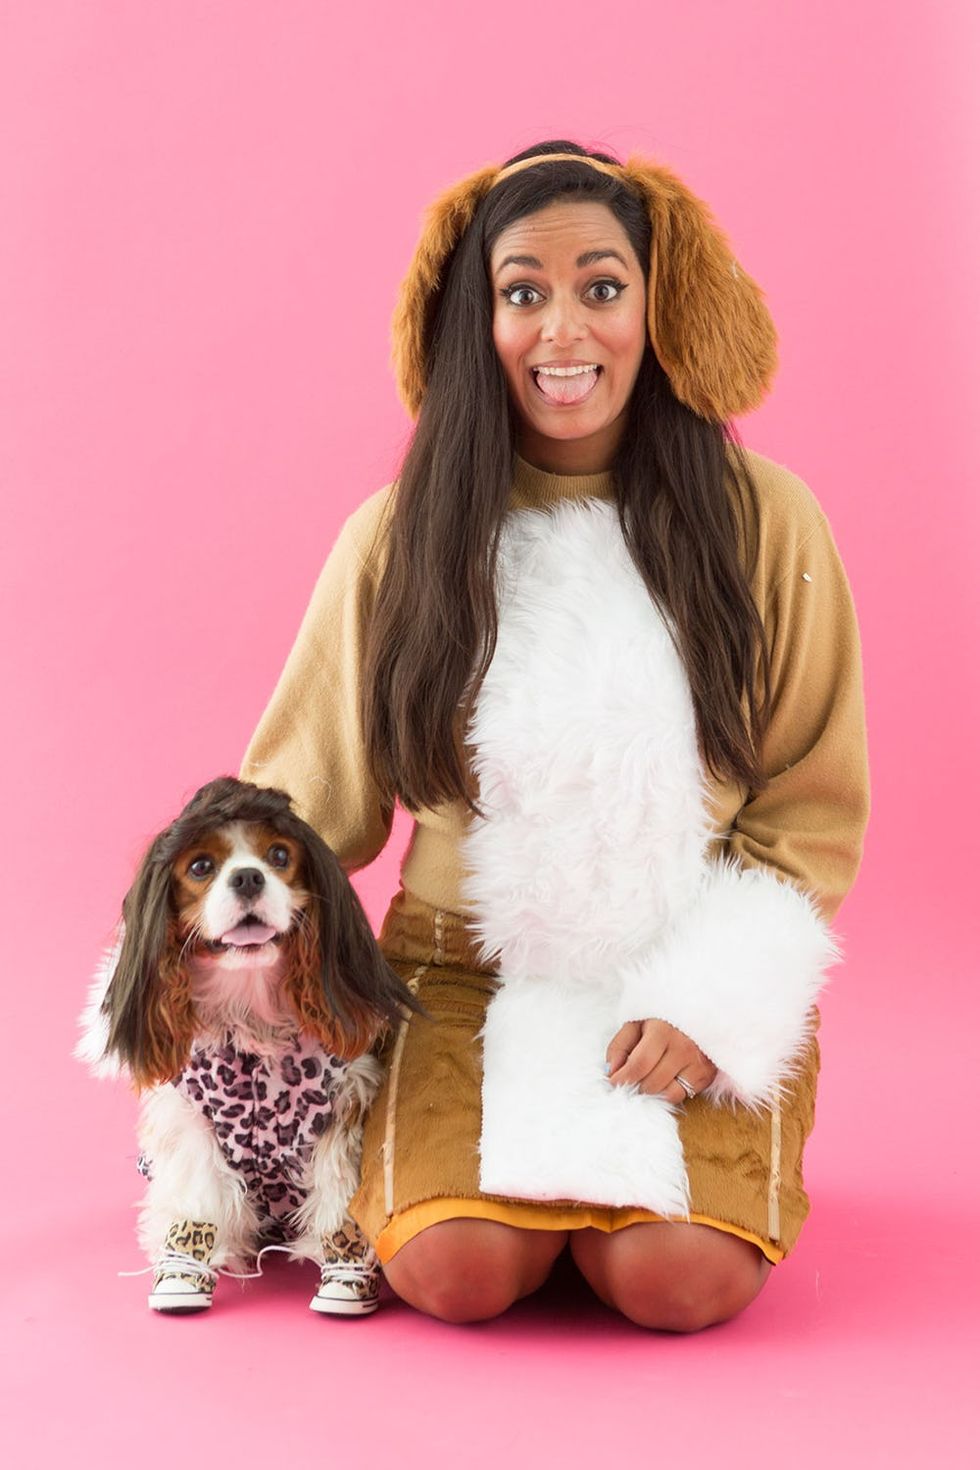 https://hips.hearstapps.com/hmg-prod/images/trading-places-costumes-with-dog-1569434687.jpg?crop=1xw:1xh;center,top&resize=980:*